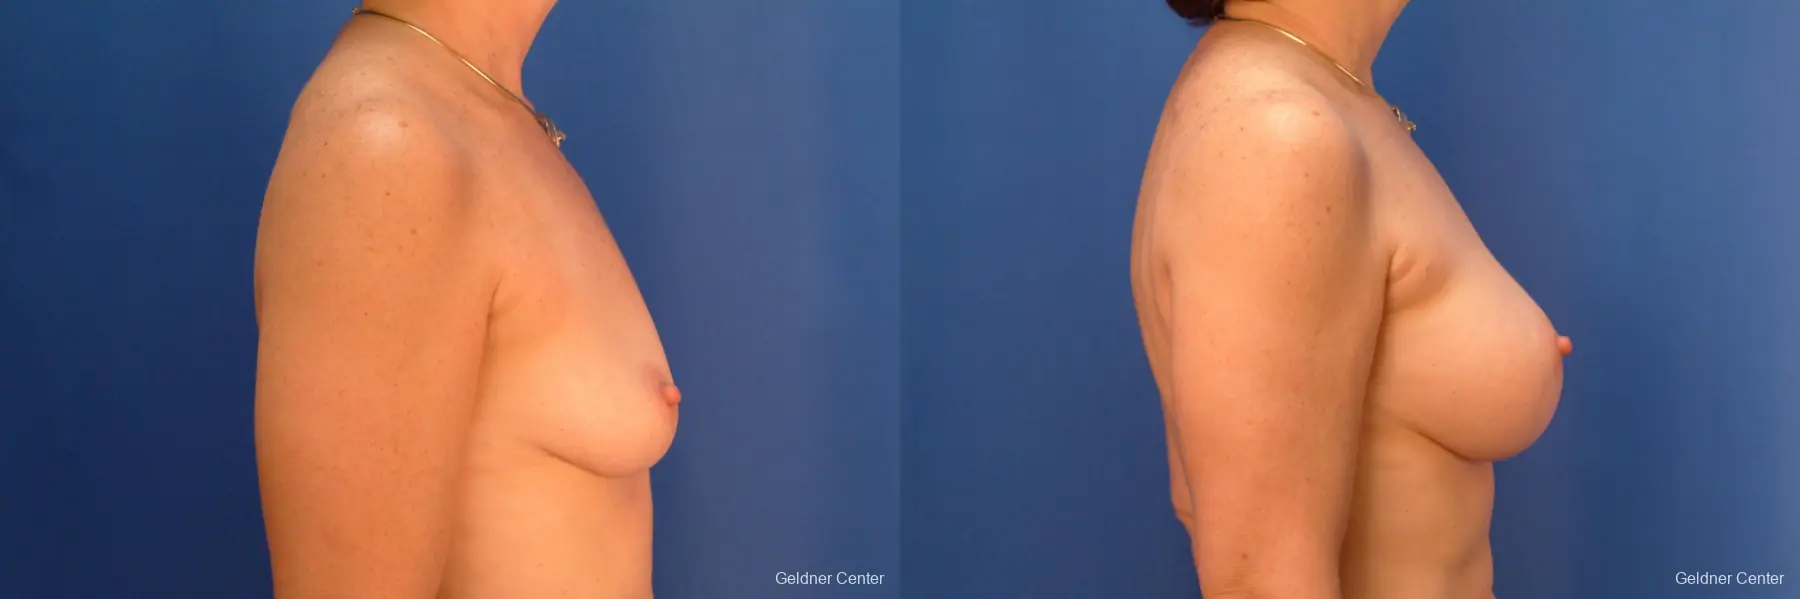 Breast Augmentation Hinsdale, Chicago 2541 - Before and After 2